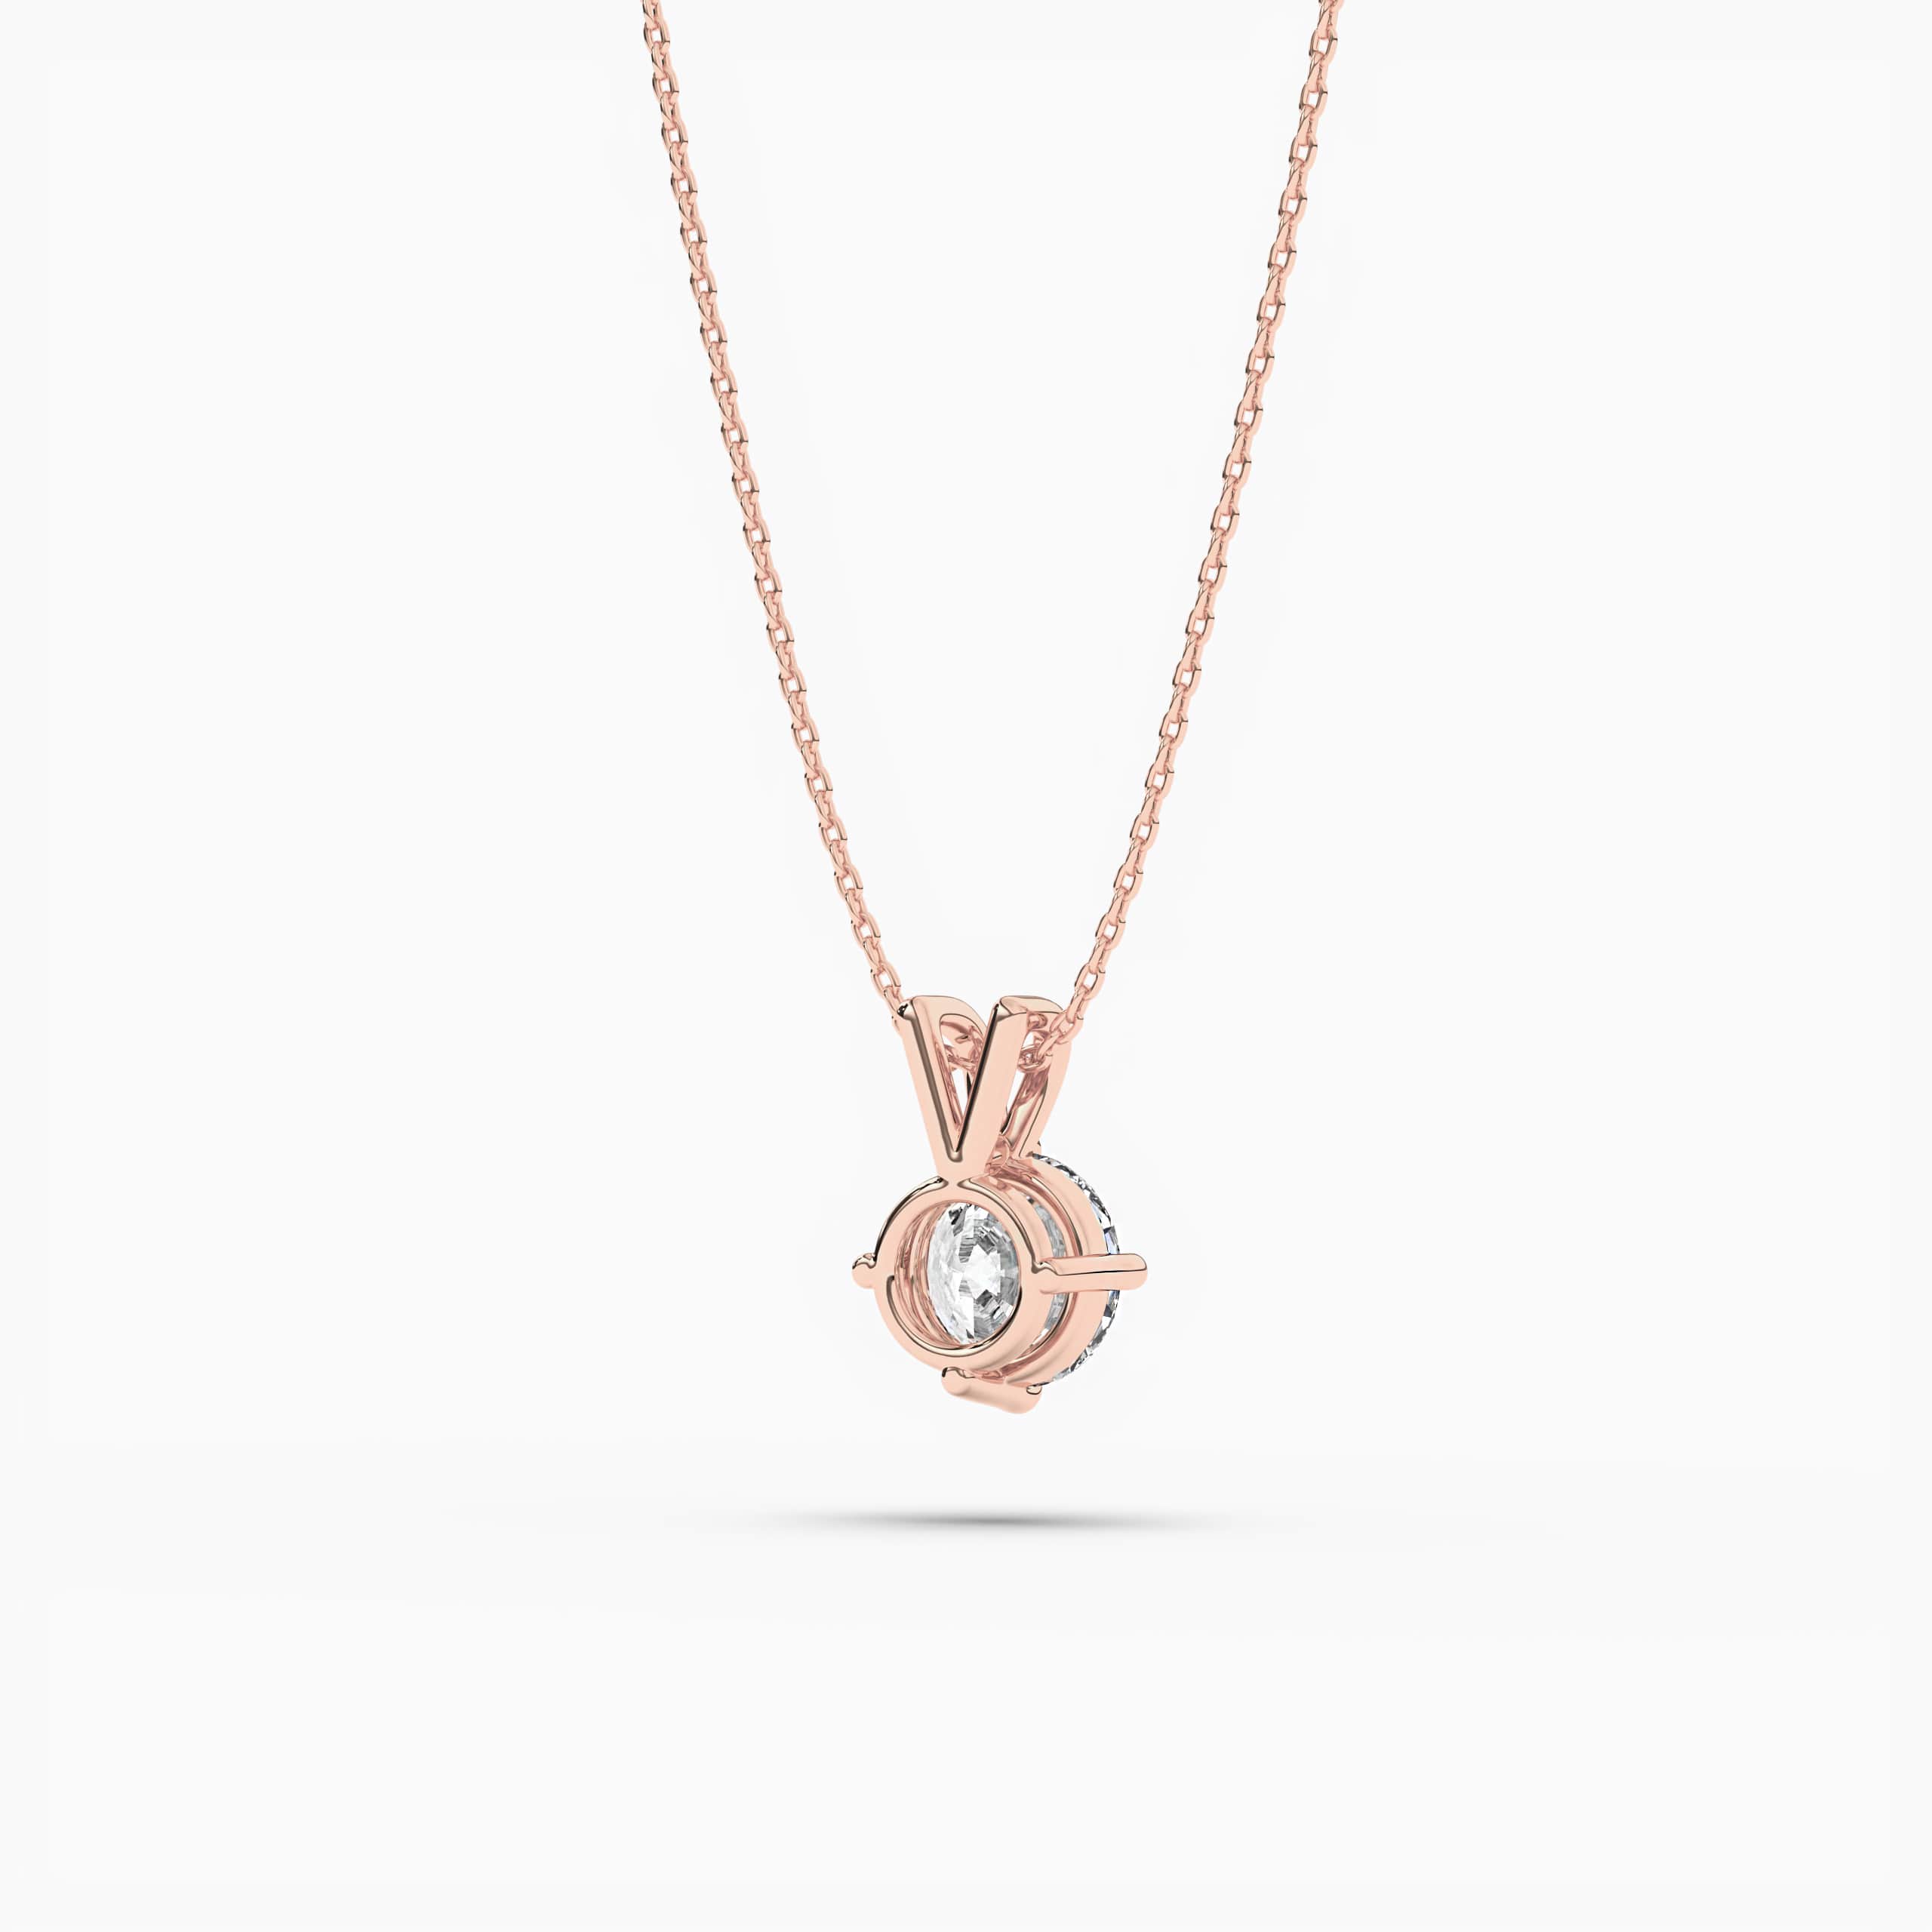 ROUND CUT SIMULATED DIAMOND ROSE GOLD ENGAGEMENT NECKLACE